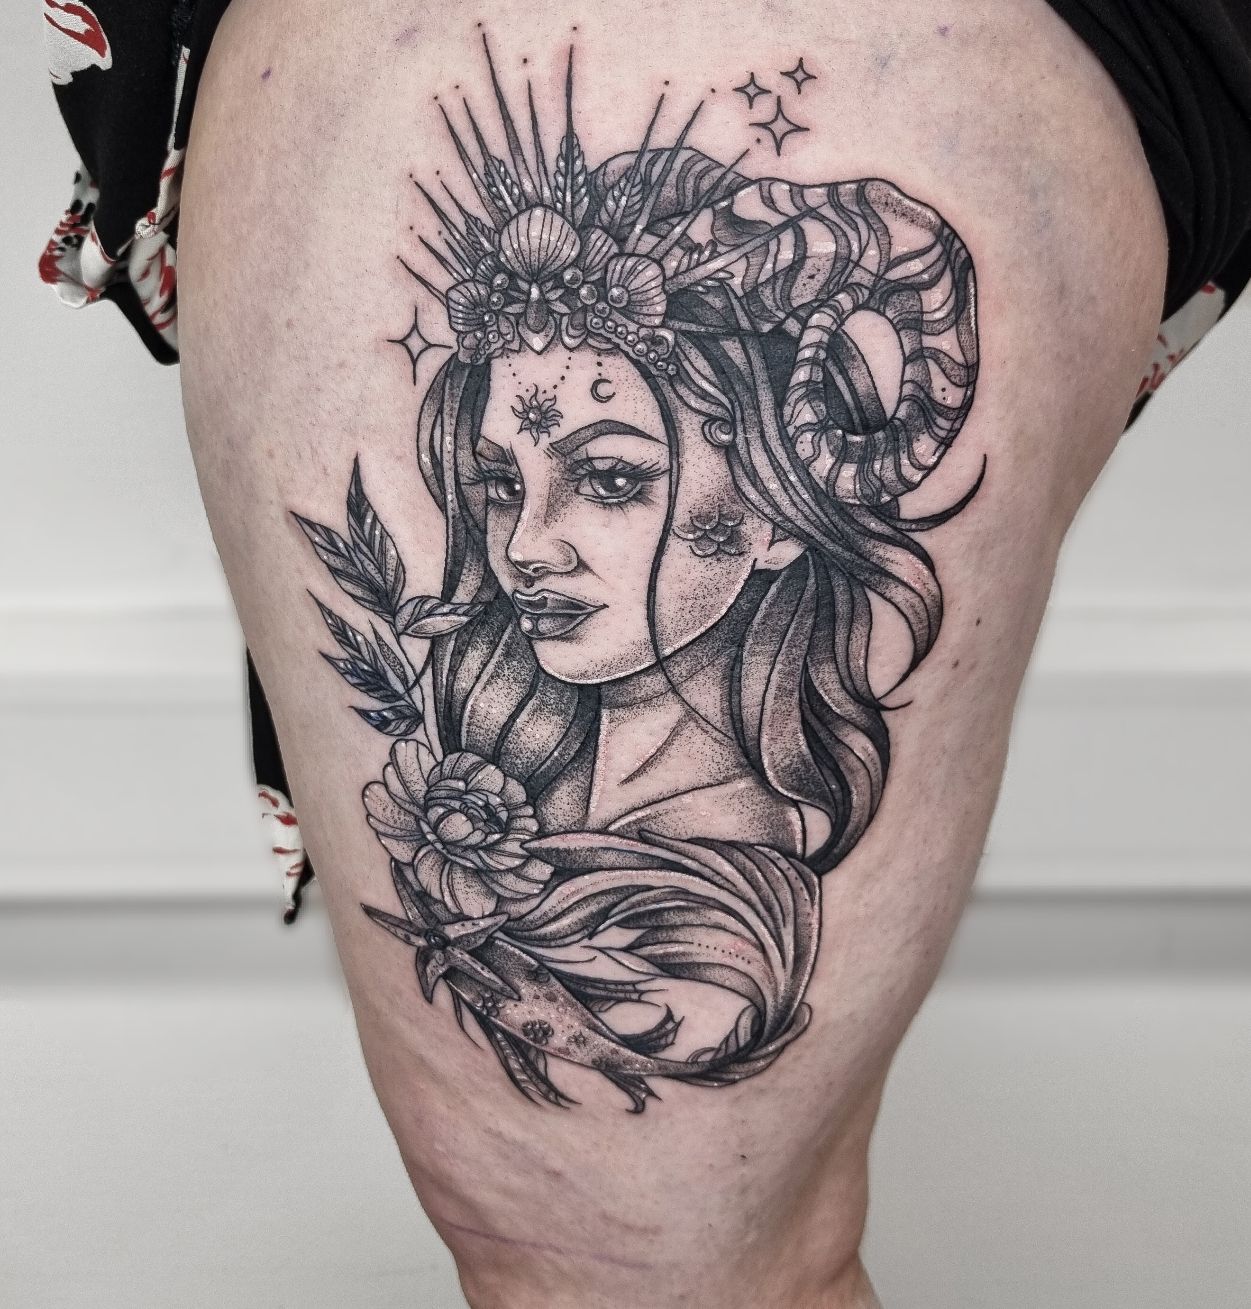 50 Timeless Capricorn Tattoos Ideas and Designs for People Born Under the  Capricorn Sign - Tat… | Capricorn tattoo, Tattoos for women half sleeve,  Tattoos for women